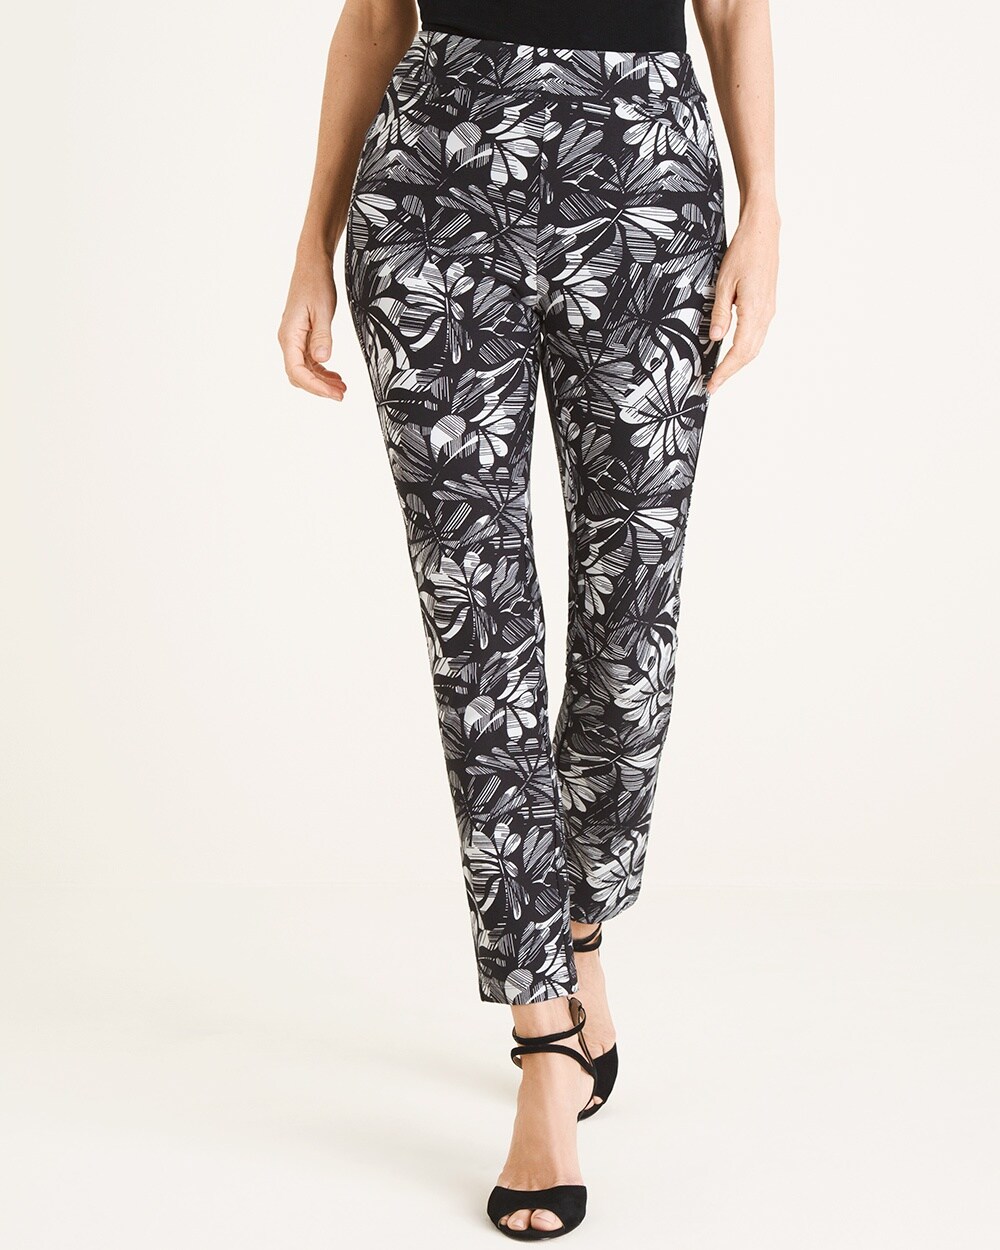 Travelers Collection Black and White Printed Crepe Ankle Pants